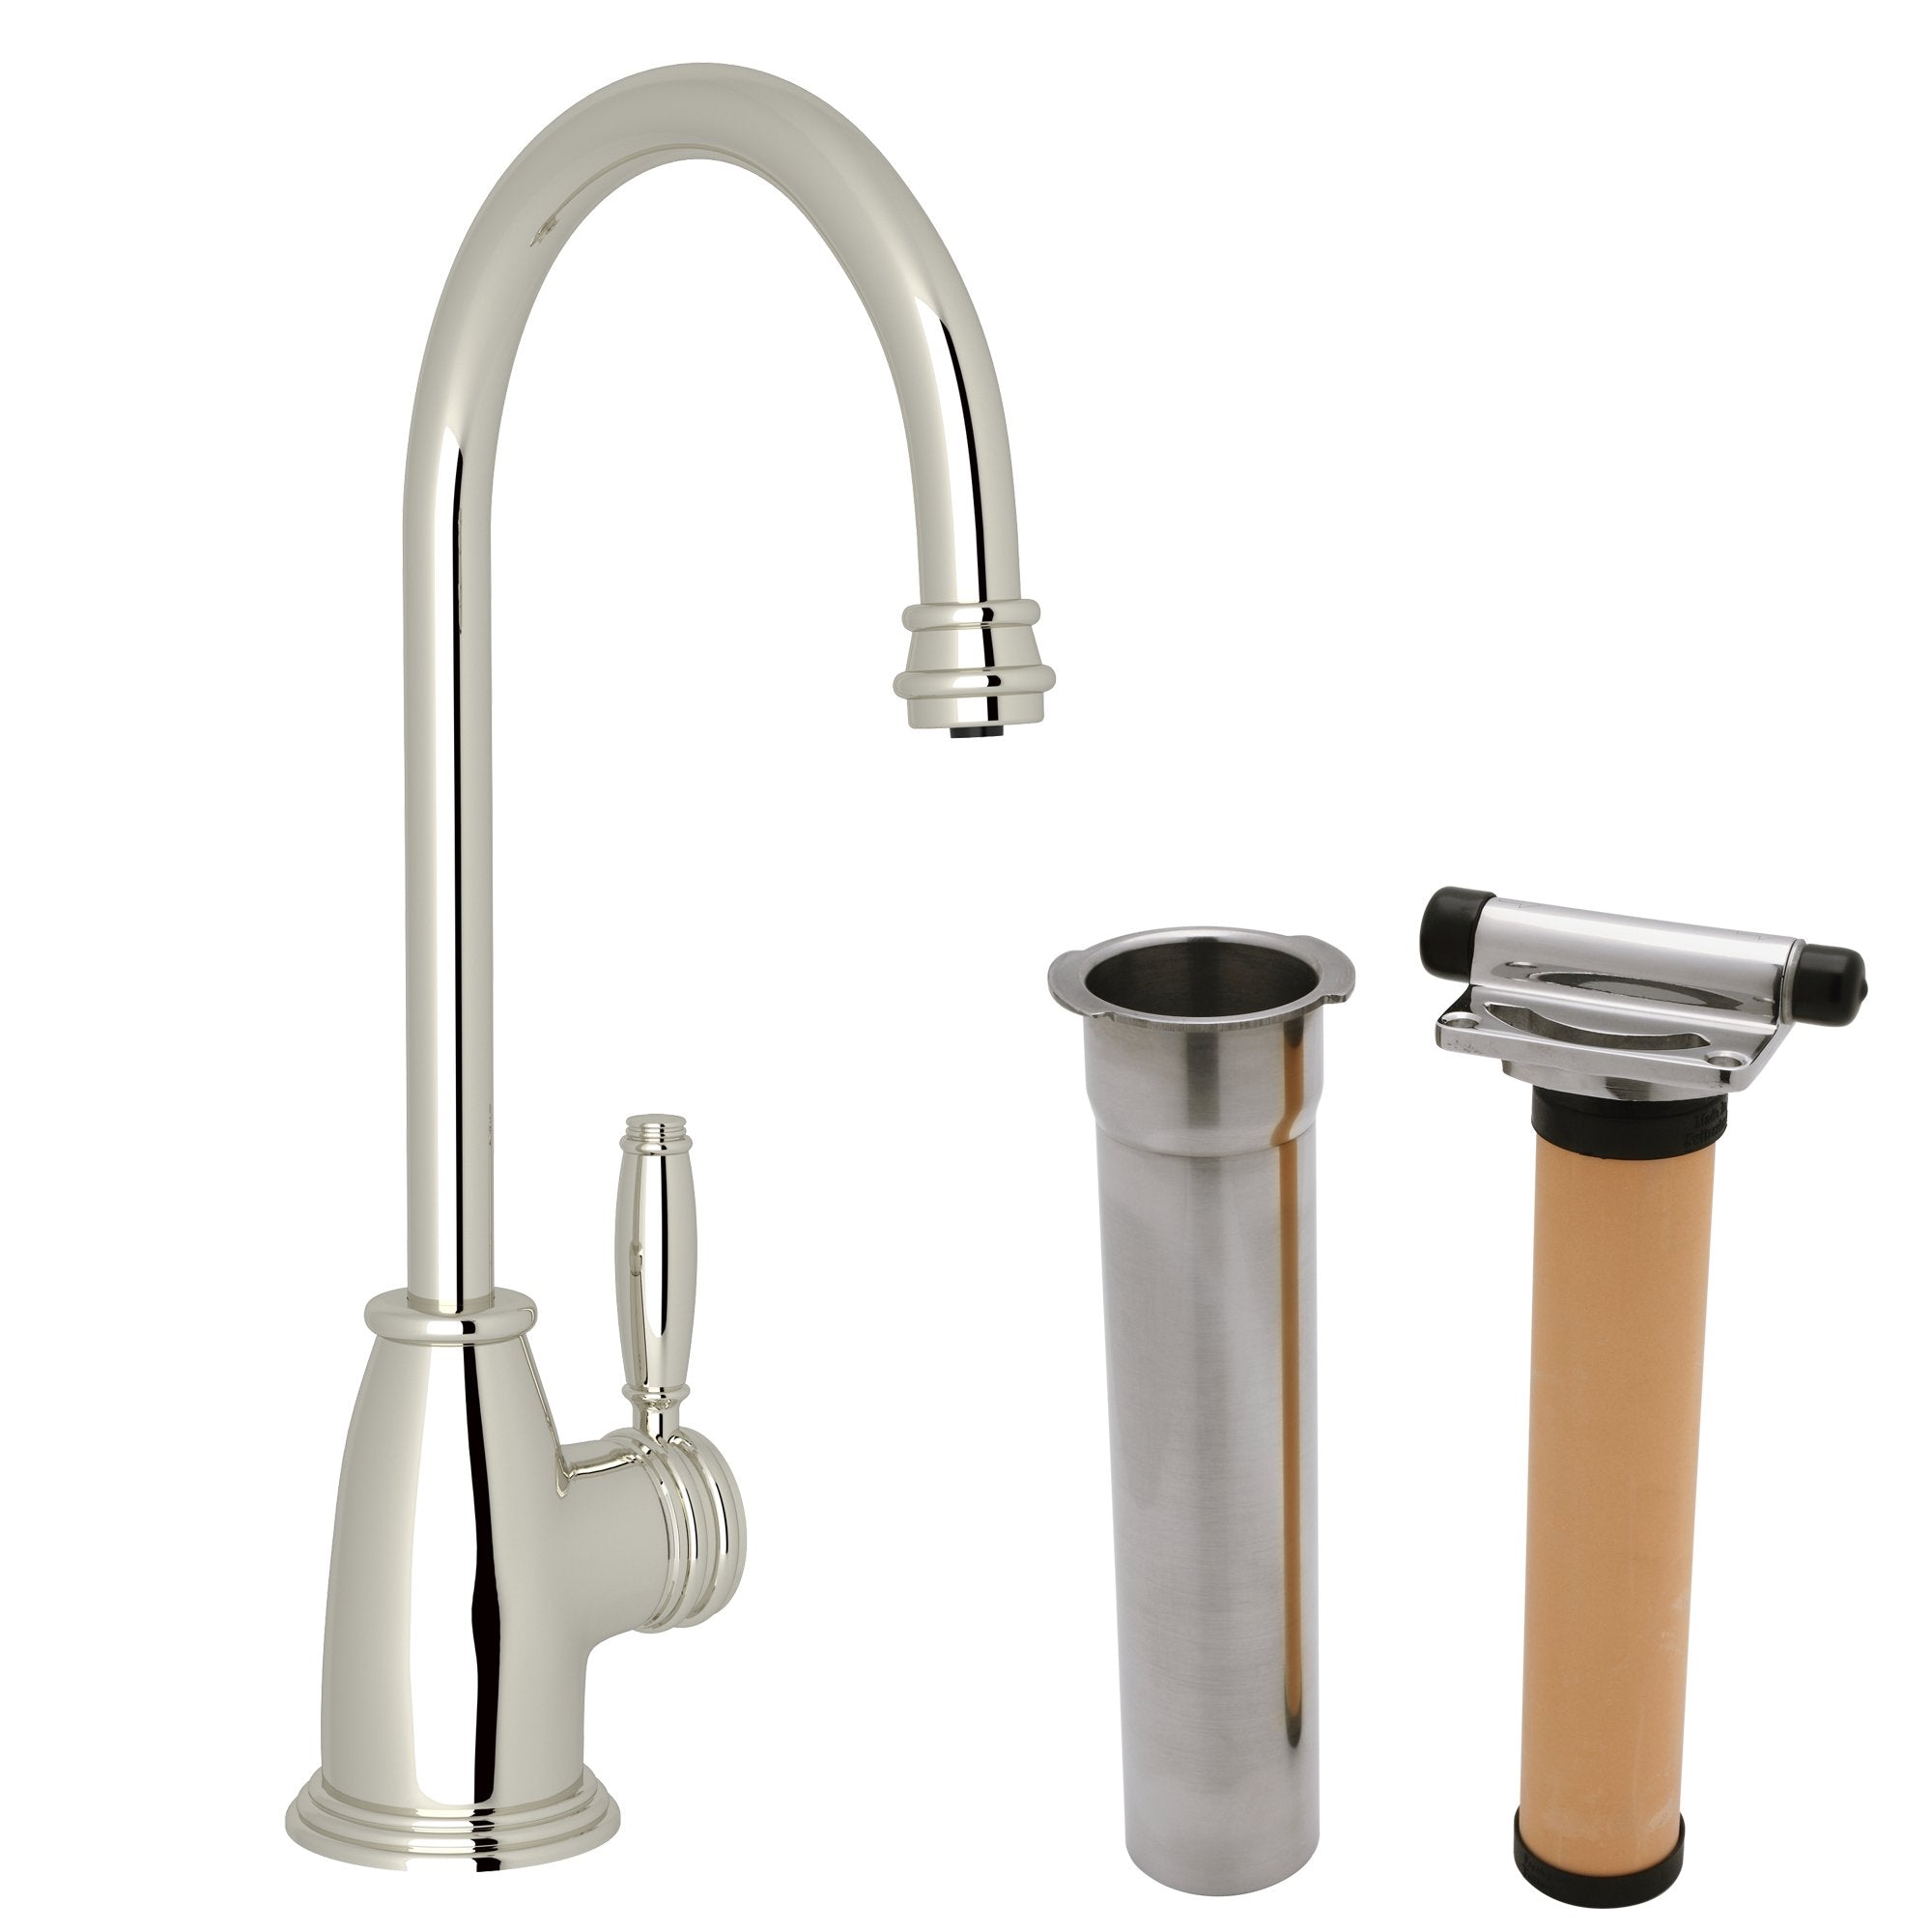 ROHL MBKIT7917 Gotham Filter Kitchen Faucet Kit